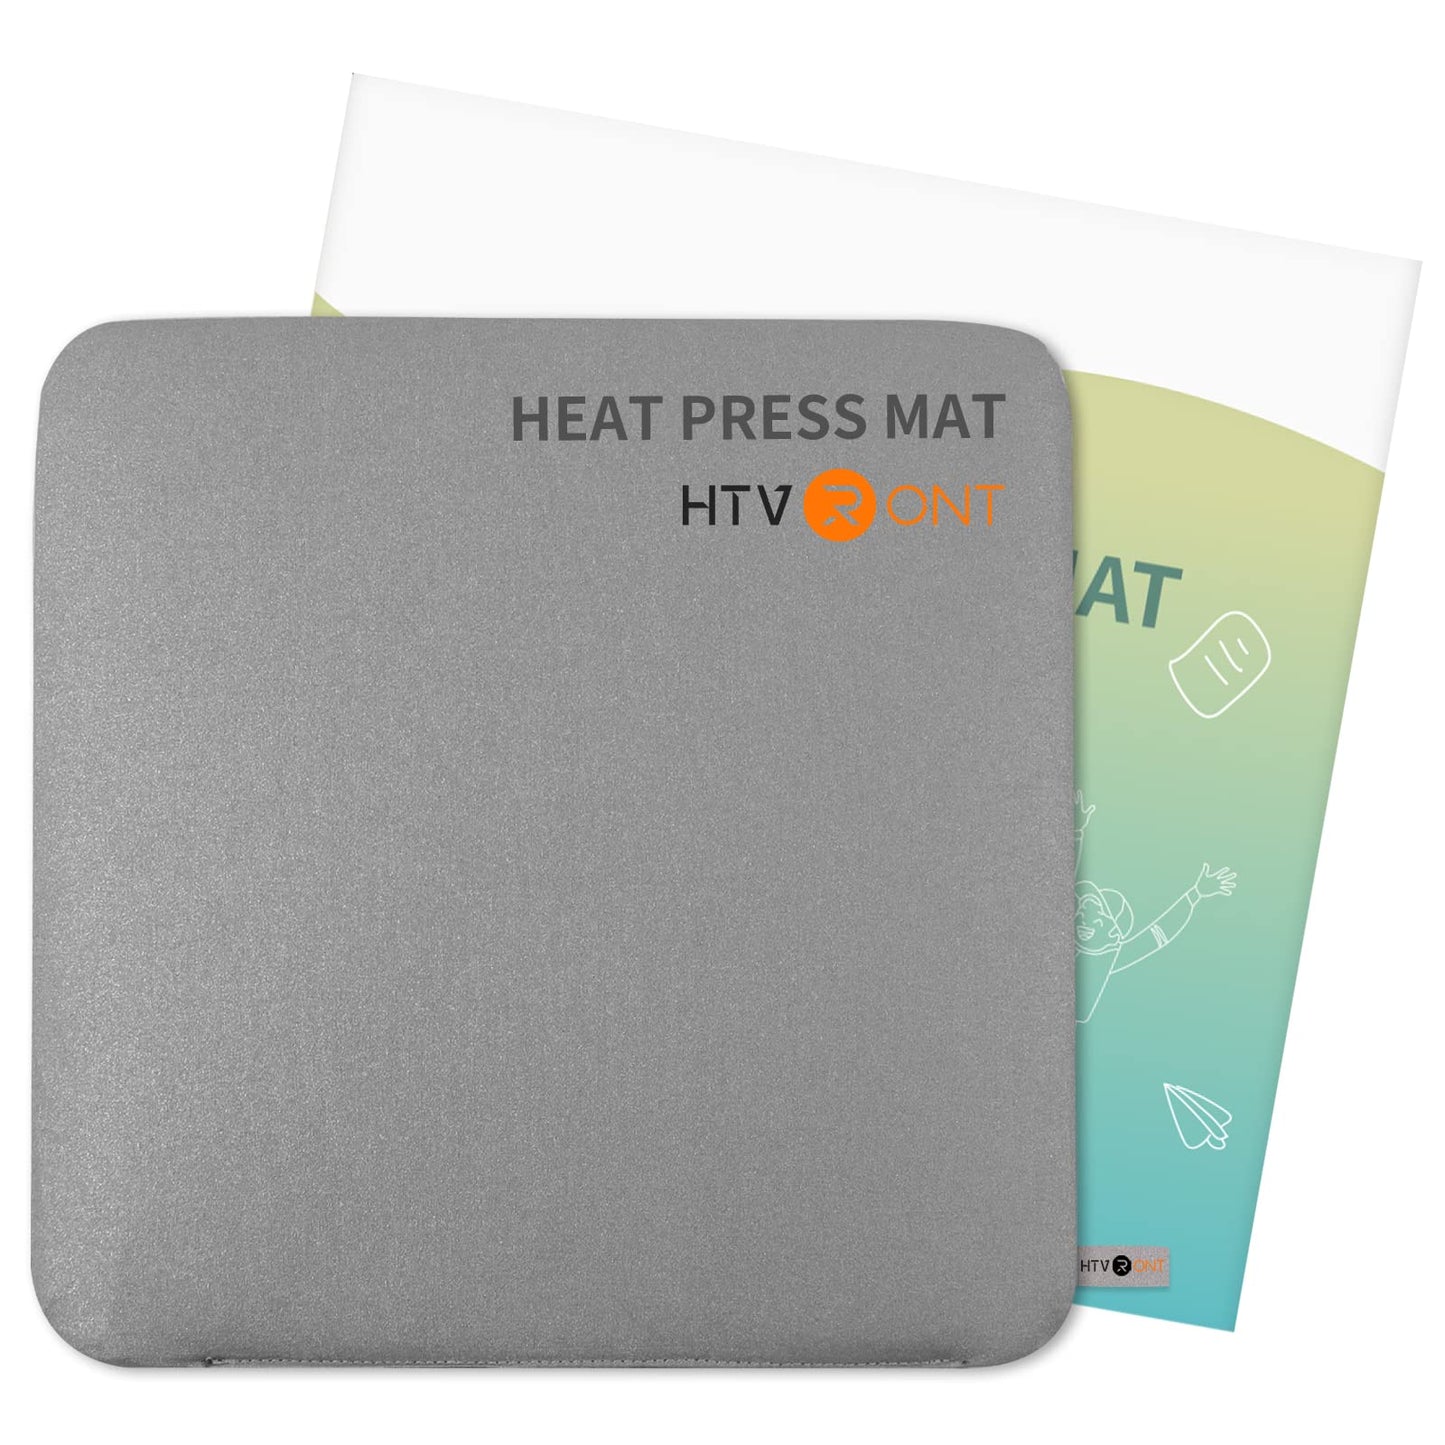 HTVRONT Heat Press Mat for Cricut: Heat Press Pad 11.5"x11.5" for Craft Vinyl Ironing Insulation Transfer, Double Sides Applicable Heat Mat for Heat